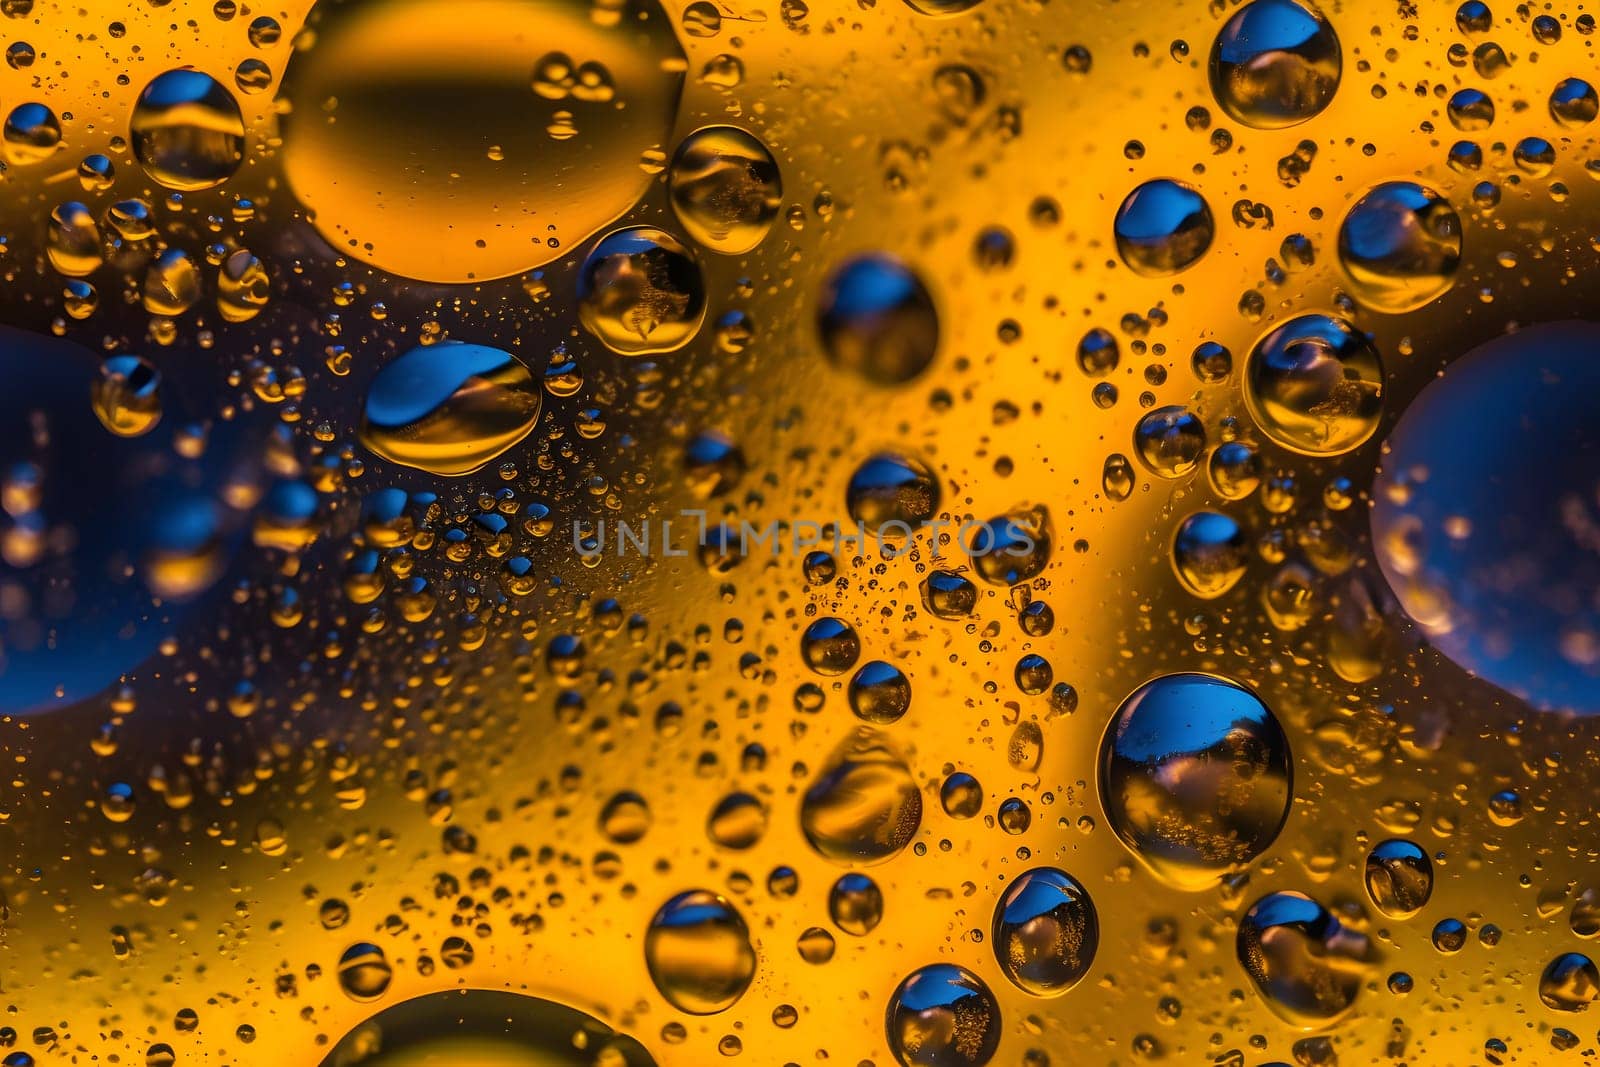 seamless yellow texture and full-frame background of water with oil or air bubbles, neural network generated art by z1b